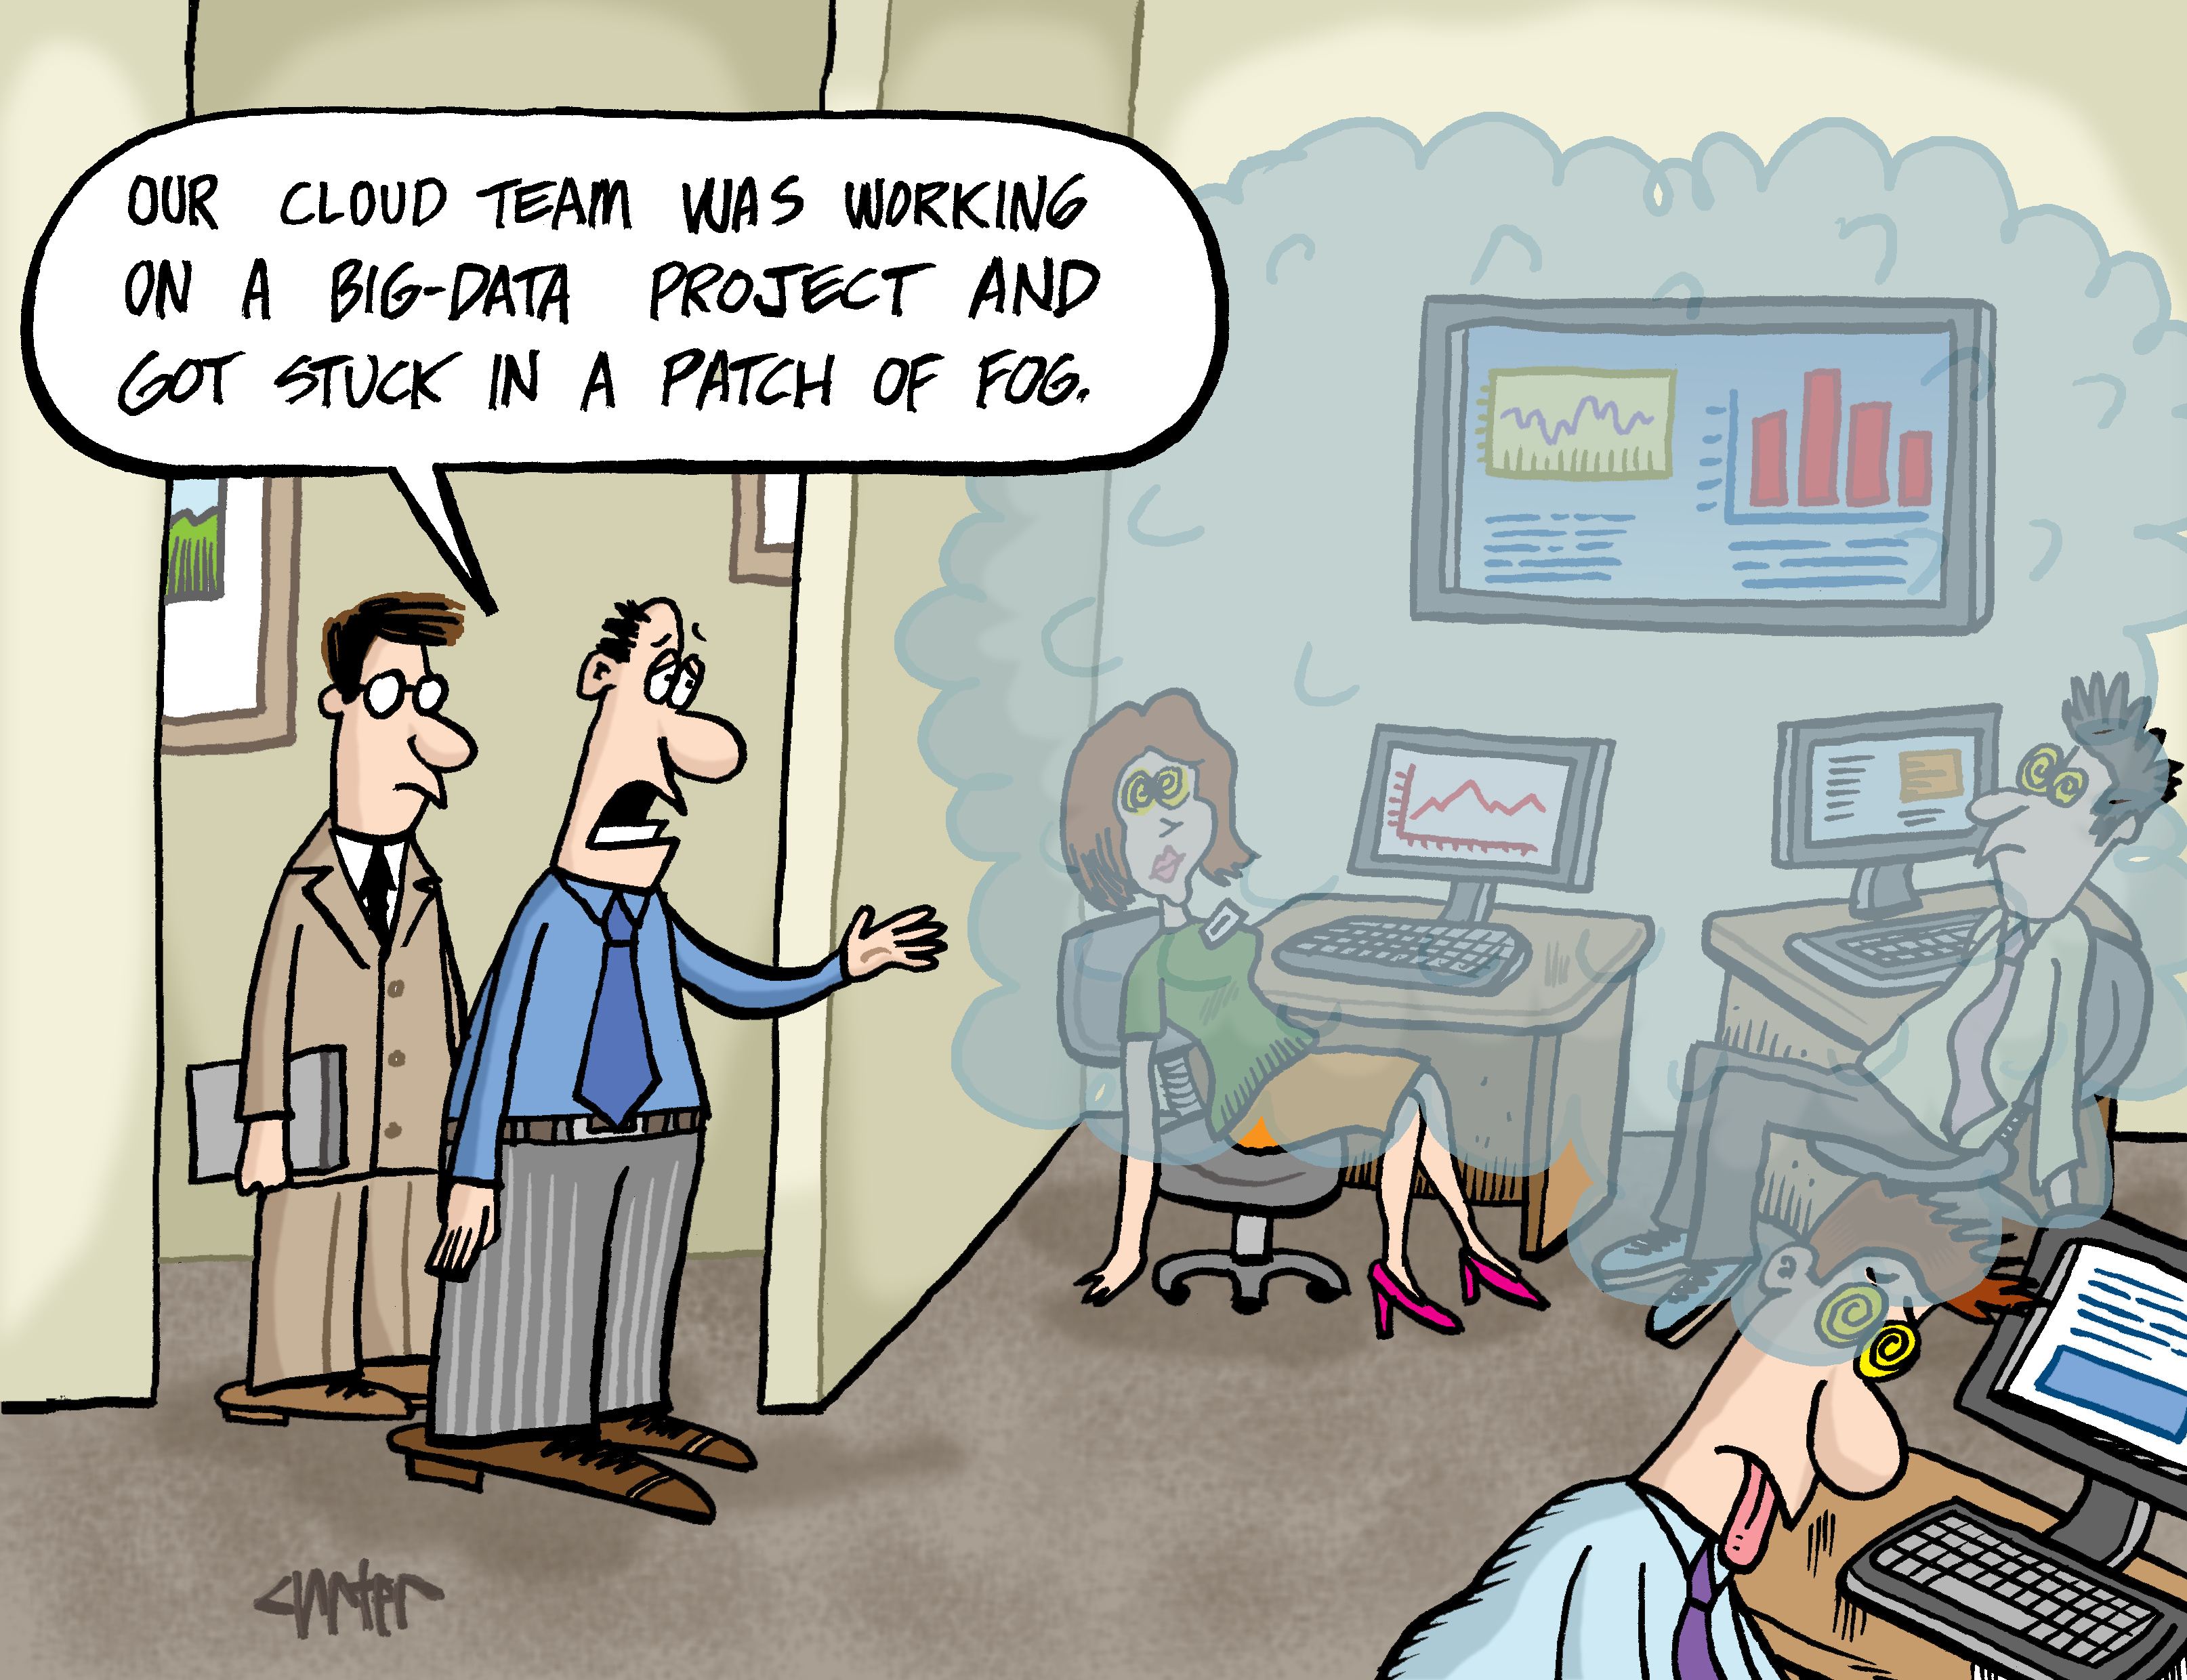 Cartoon showing room full of people dazed by a strange indoor fog.  Person entering room says: Our cloud team was working on a big-data project and got stuck in a patch of fog.